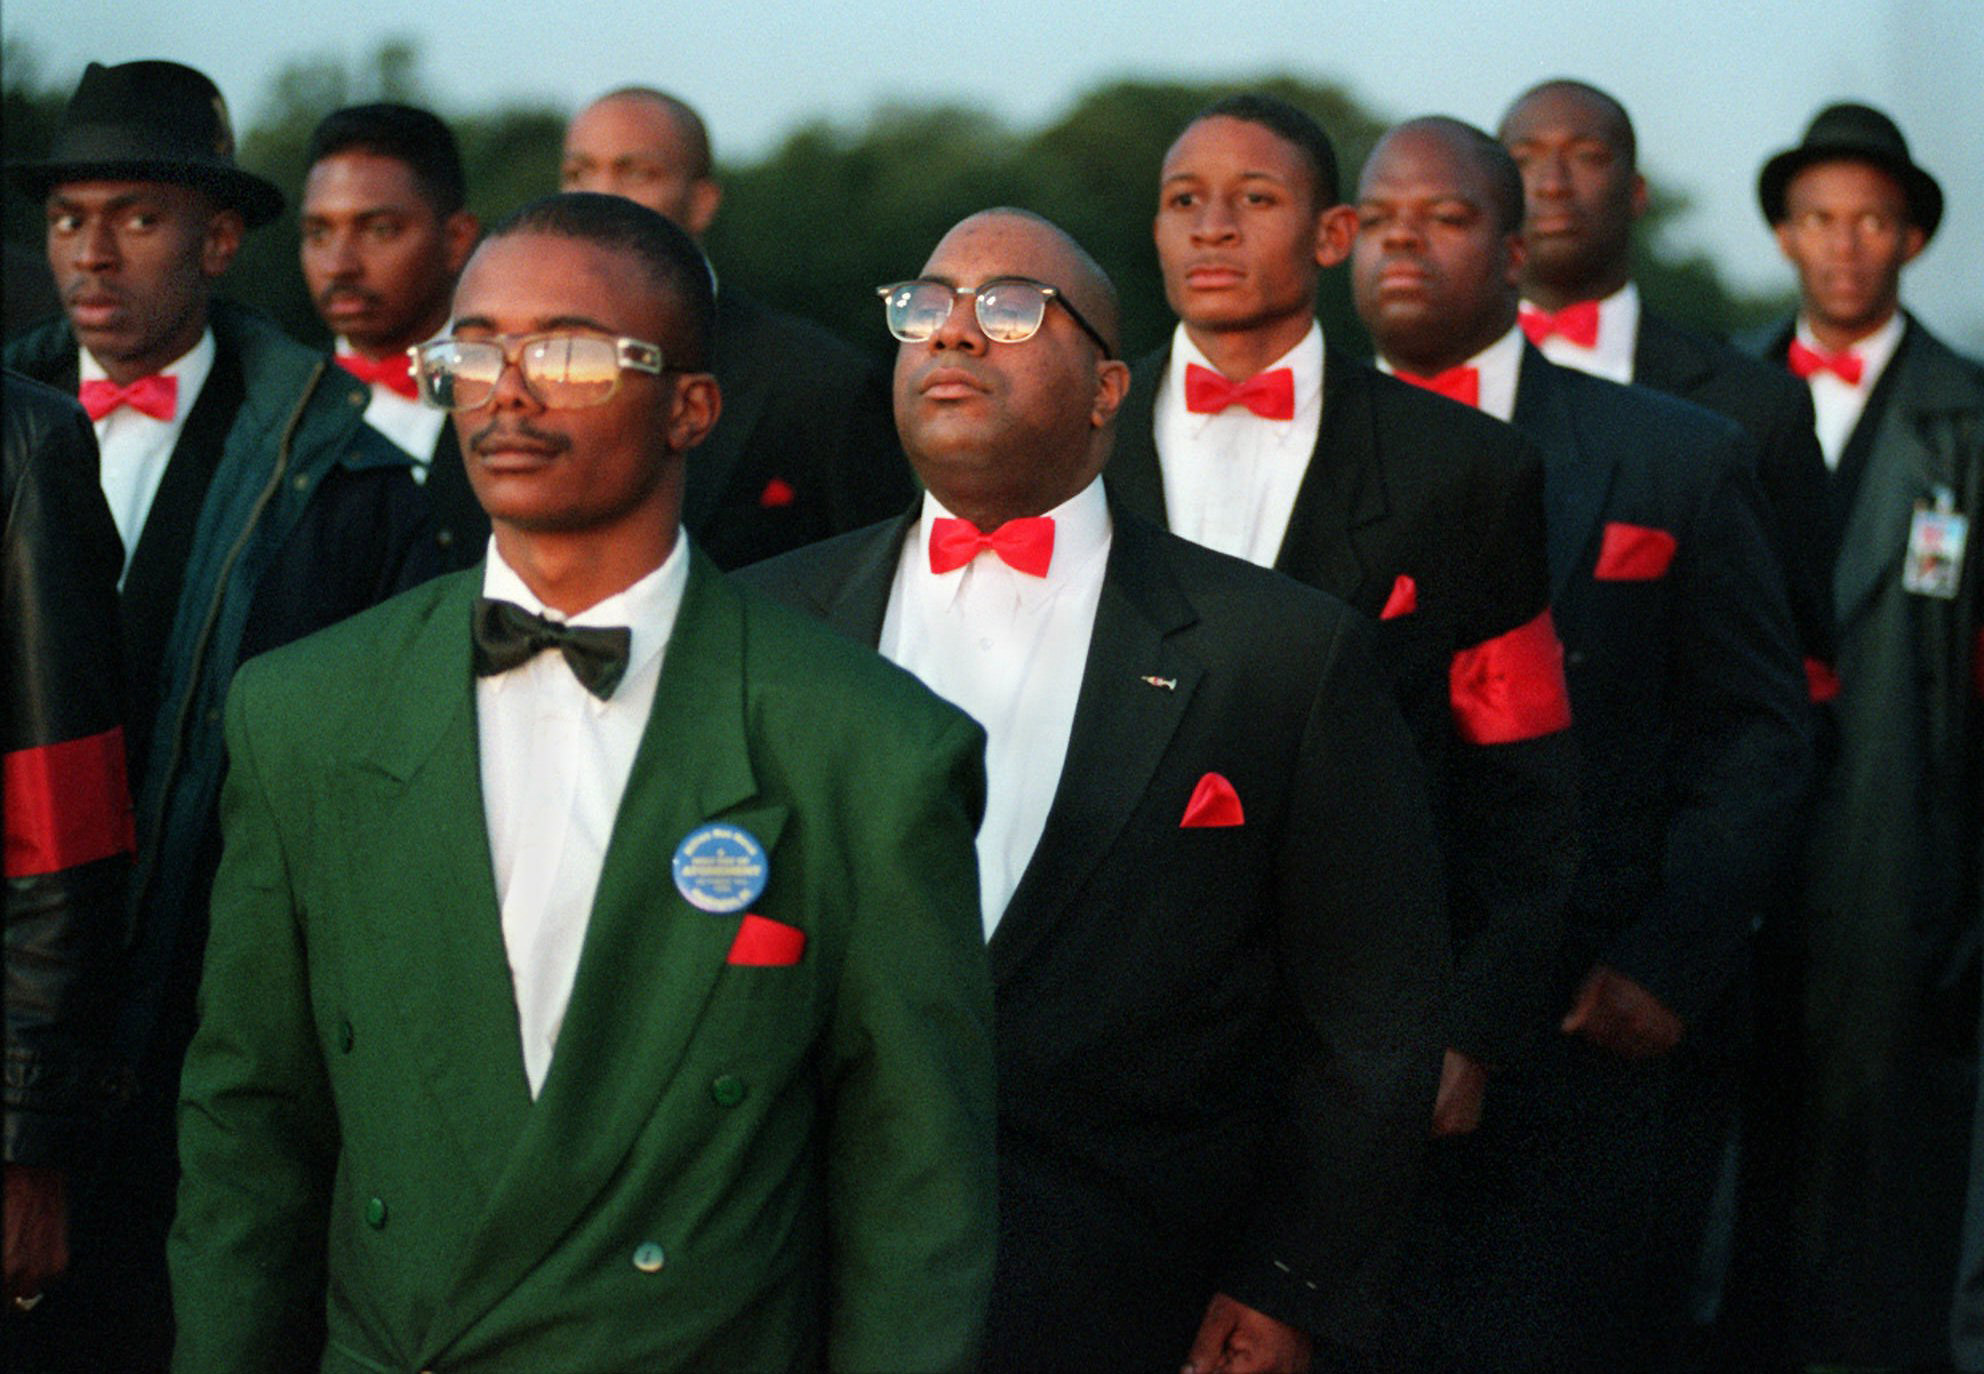 West Coast members of the Nation of Islam gather on the Mall in Washington, Monday, Oct. 16, 1995, prior to the start of the Million Man March.